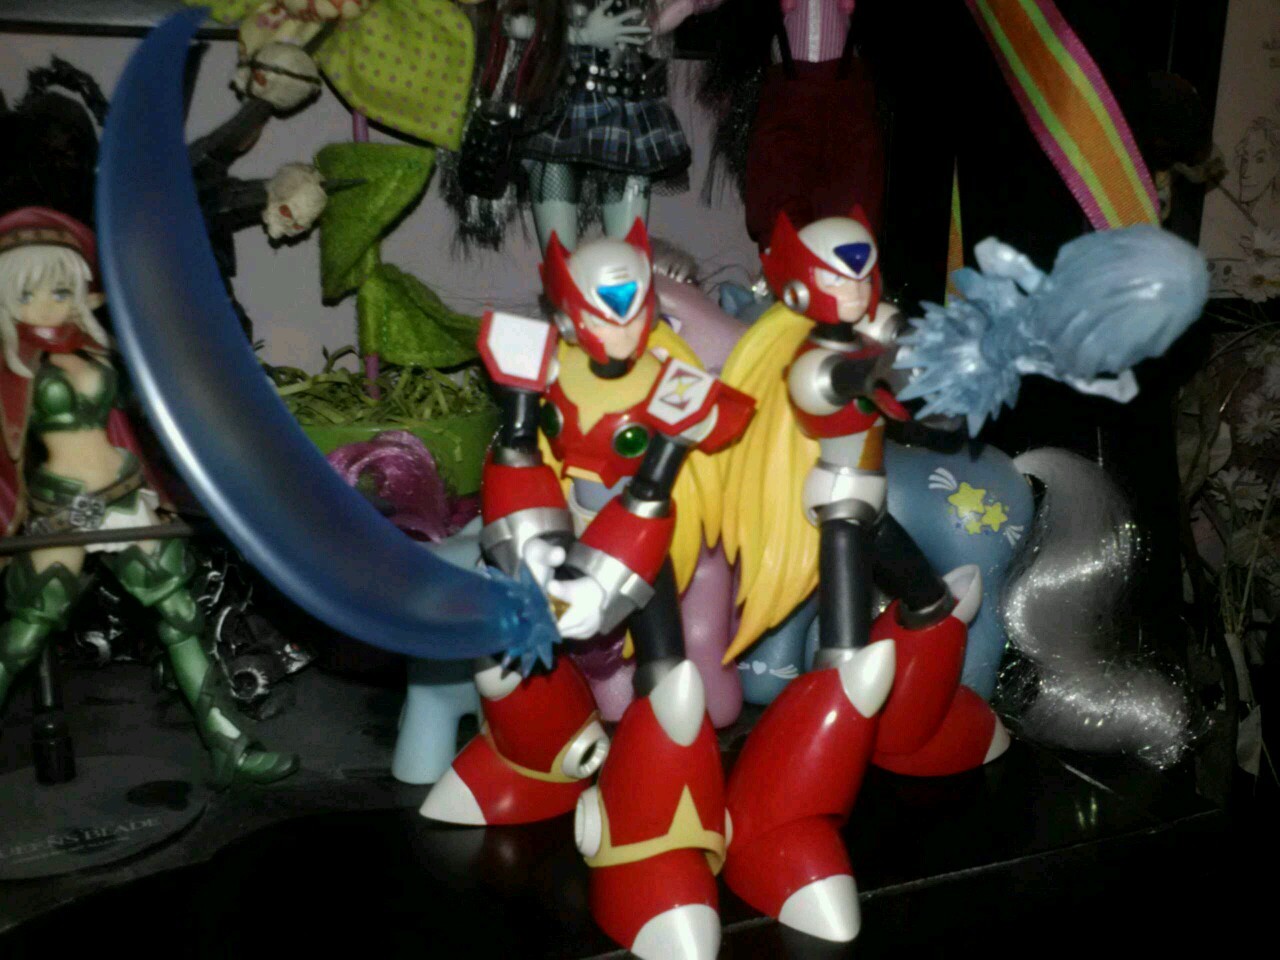 Finally got around to putting up my other Zero figure. Man do they look bad ass back